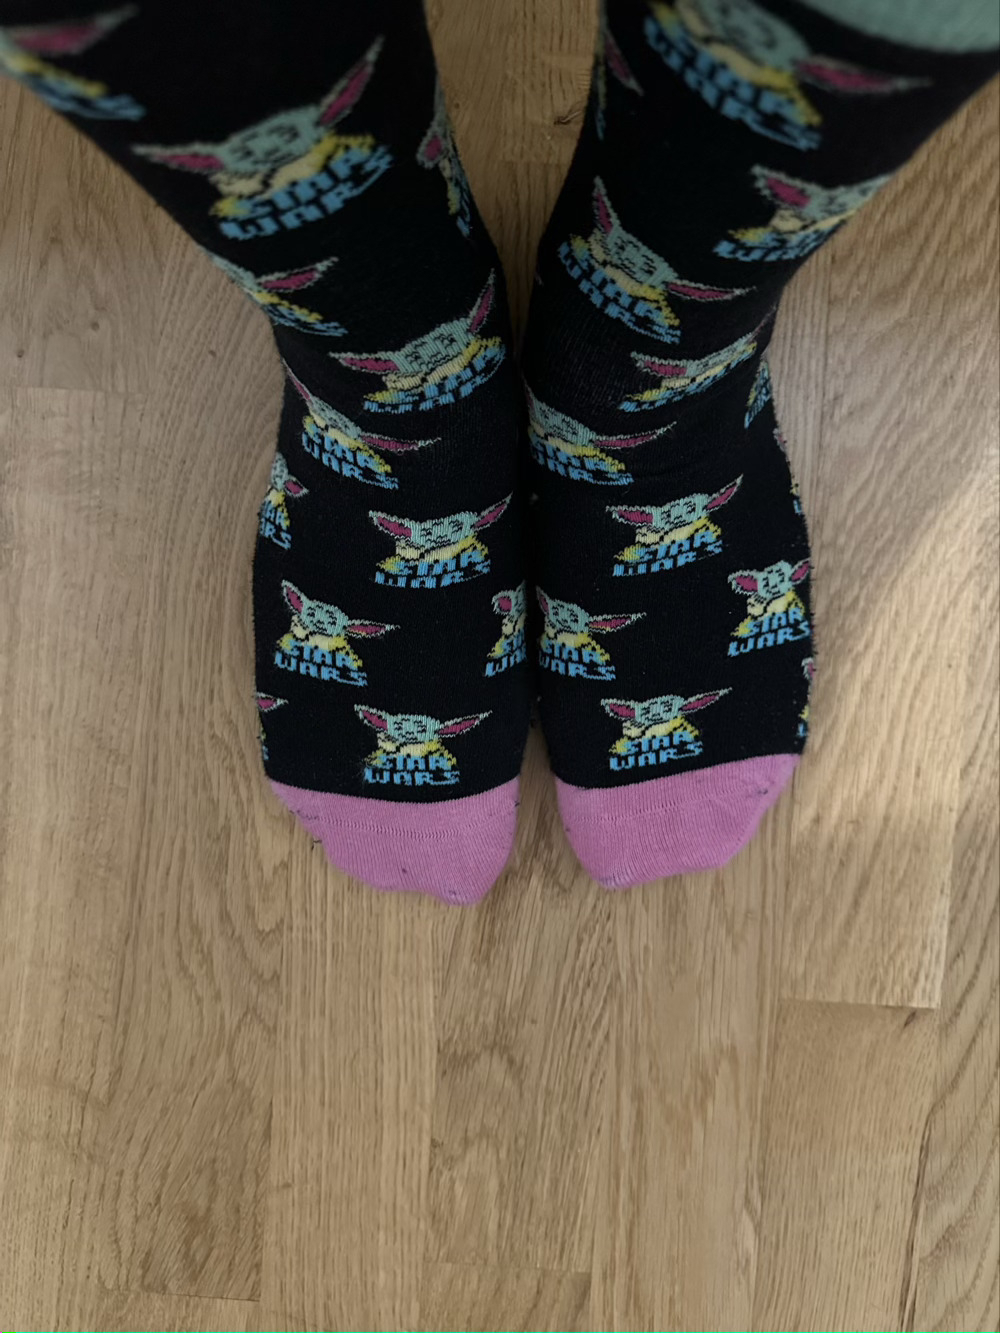 Picture of feet wearing black socks with neon pink on the toes and covered with baby Yoda designs. 